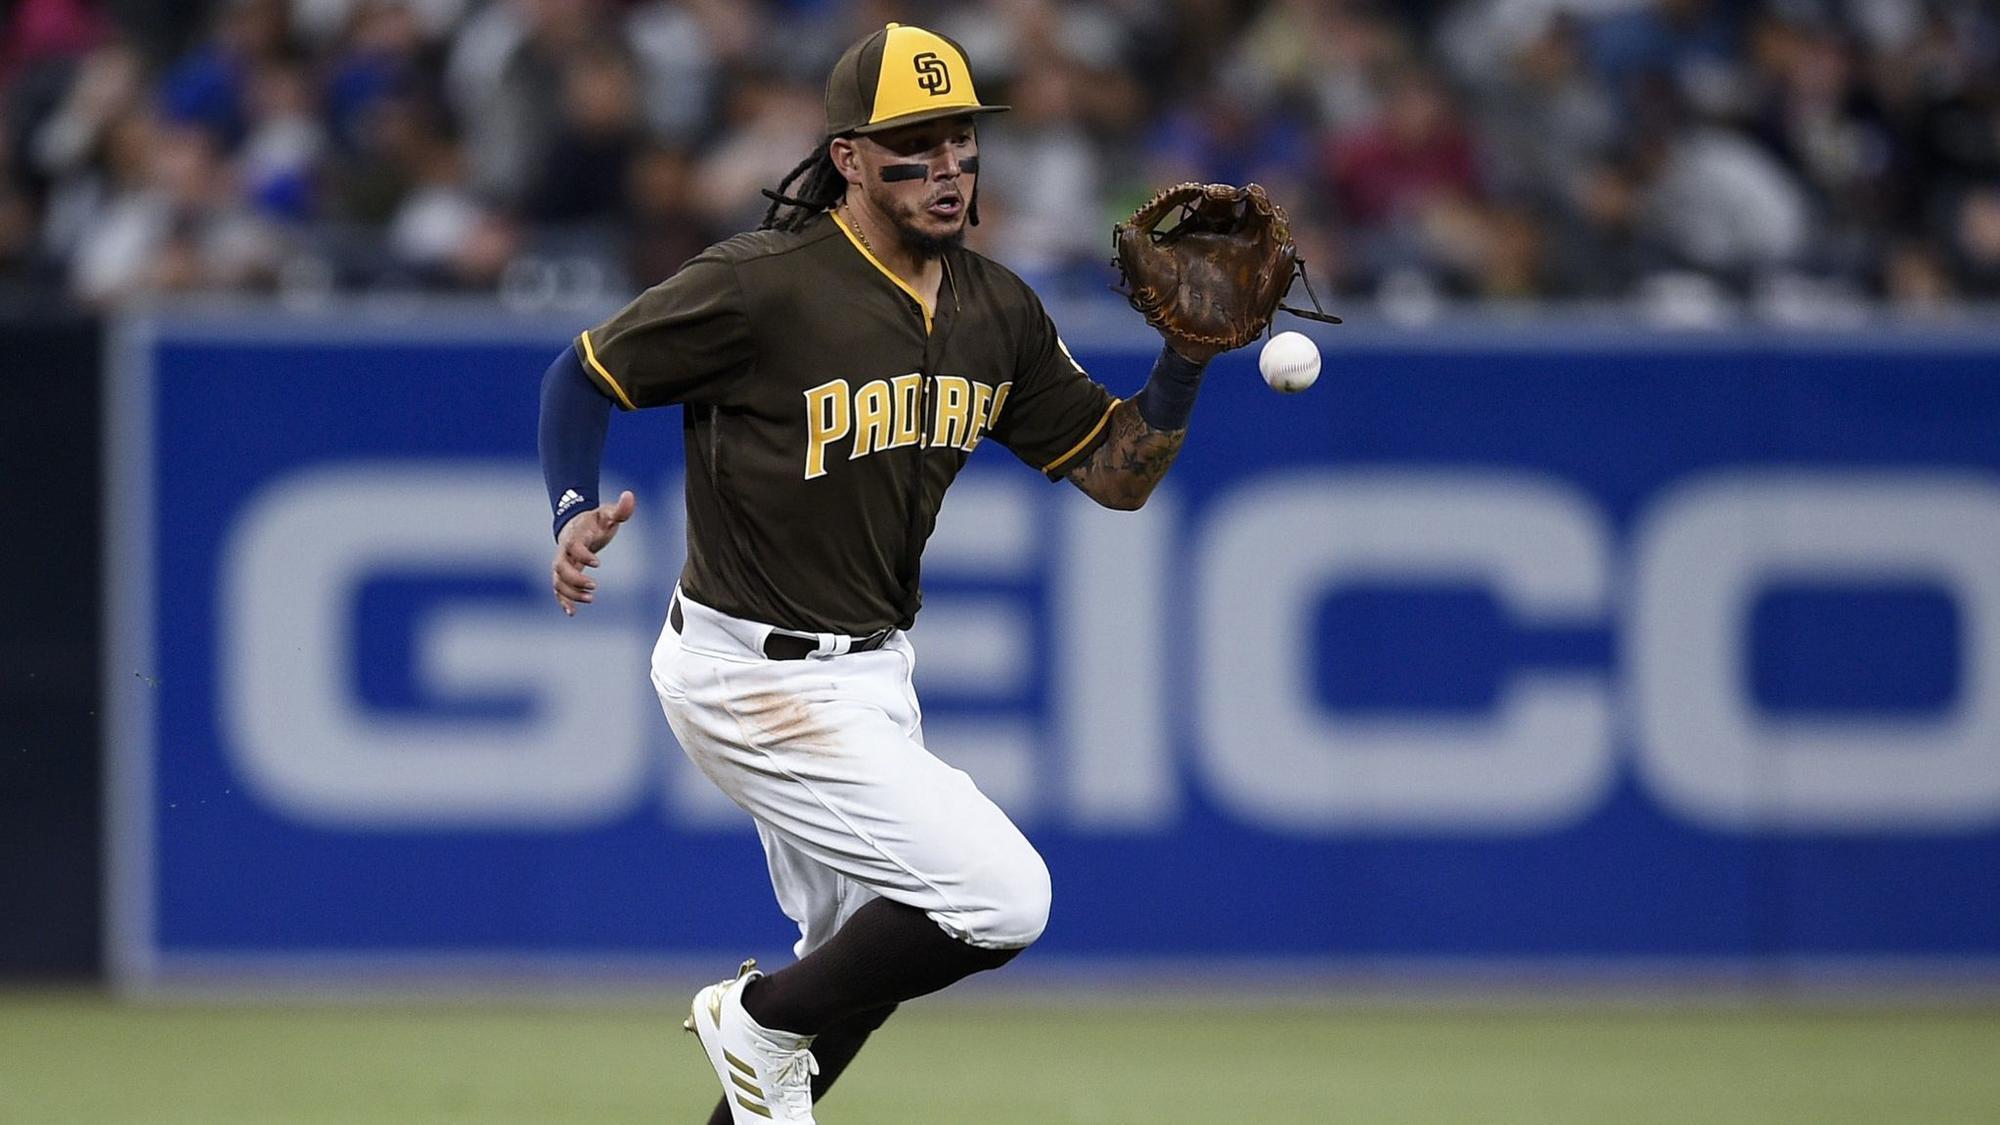 Padres notes: Team leads MLB in runs saved, runs given away; Perdomo back; wild Maki